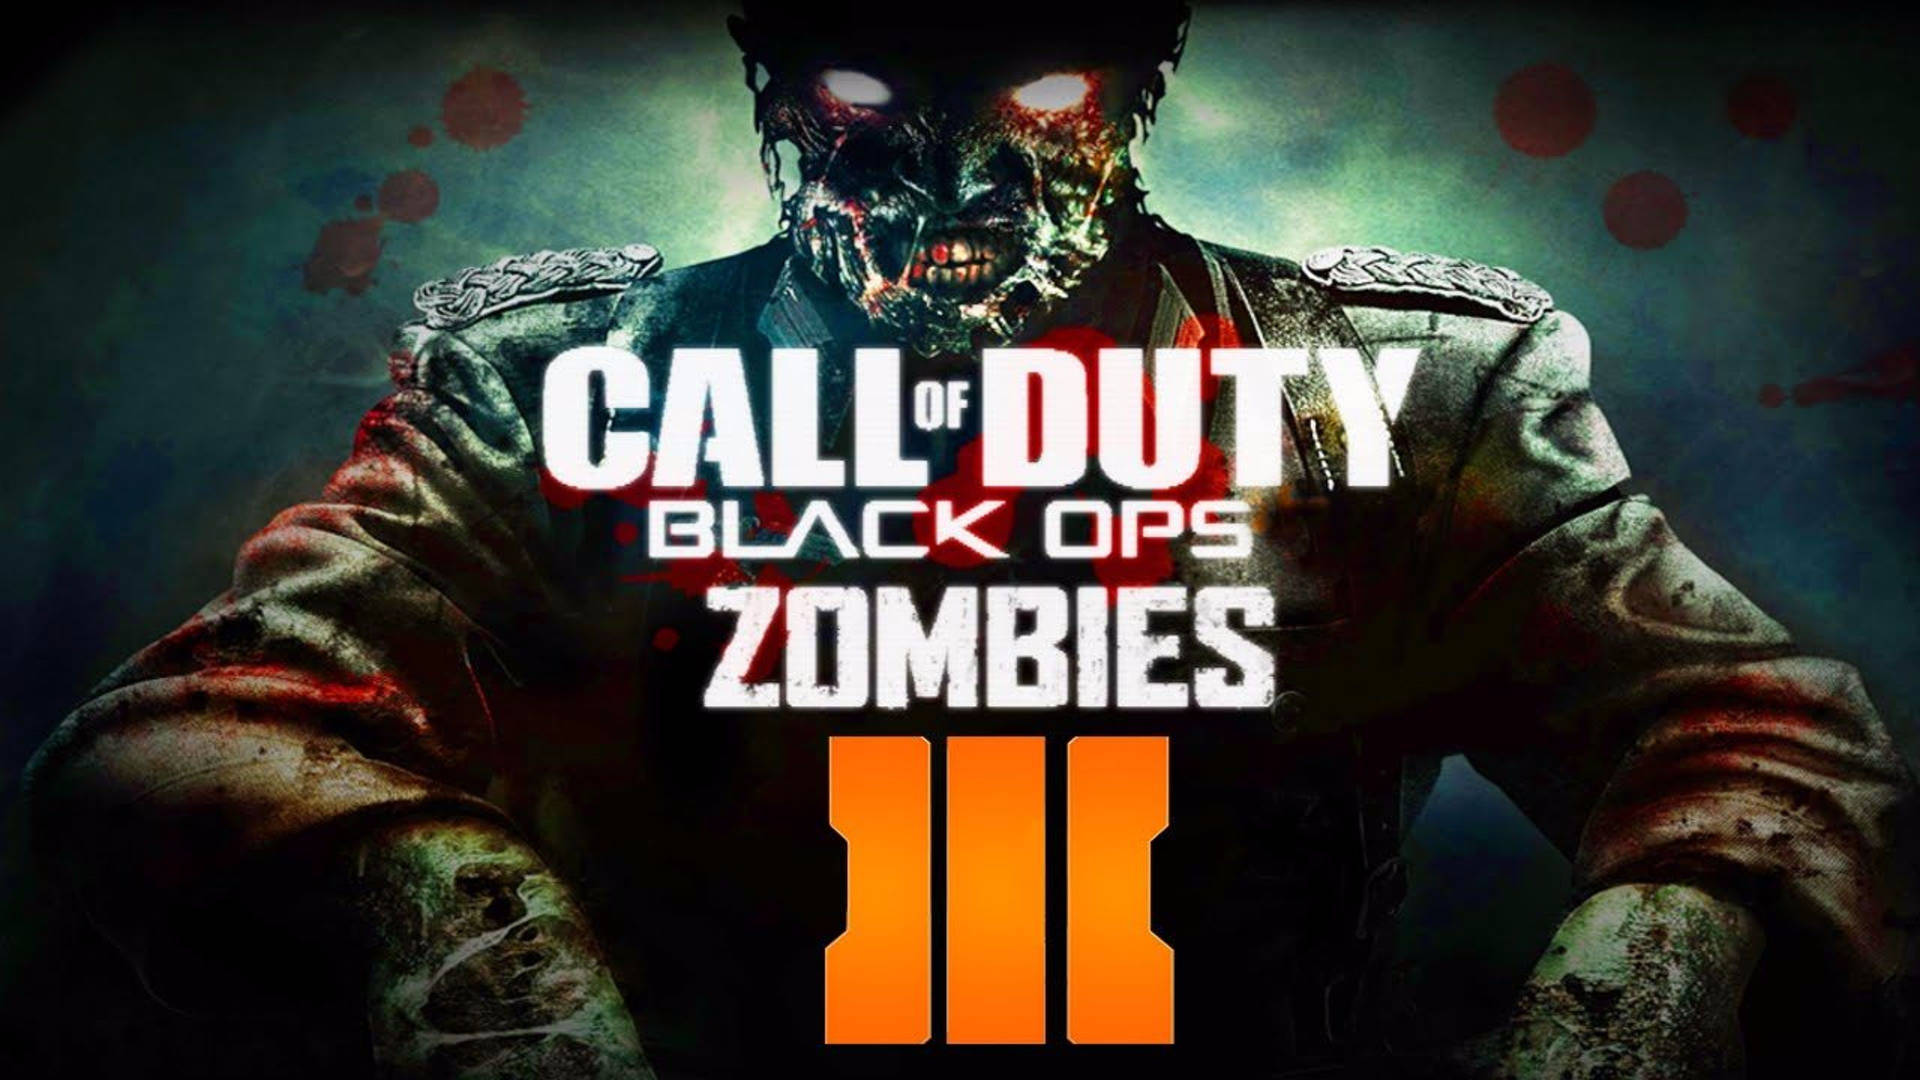 Zombie Call Of Duty Digital Poster Wallpaper